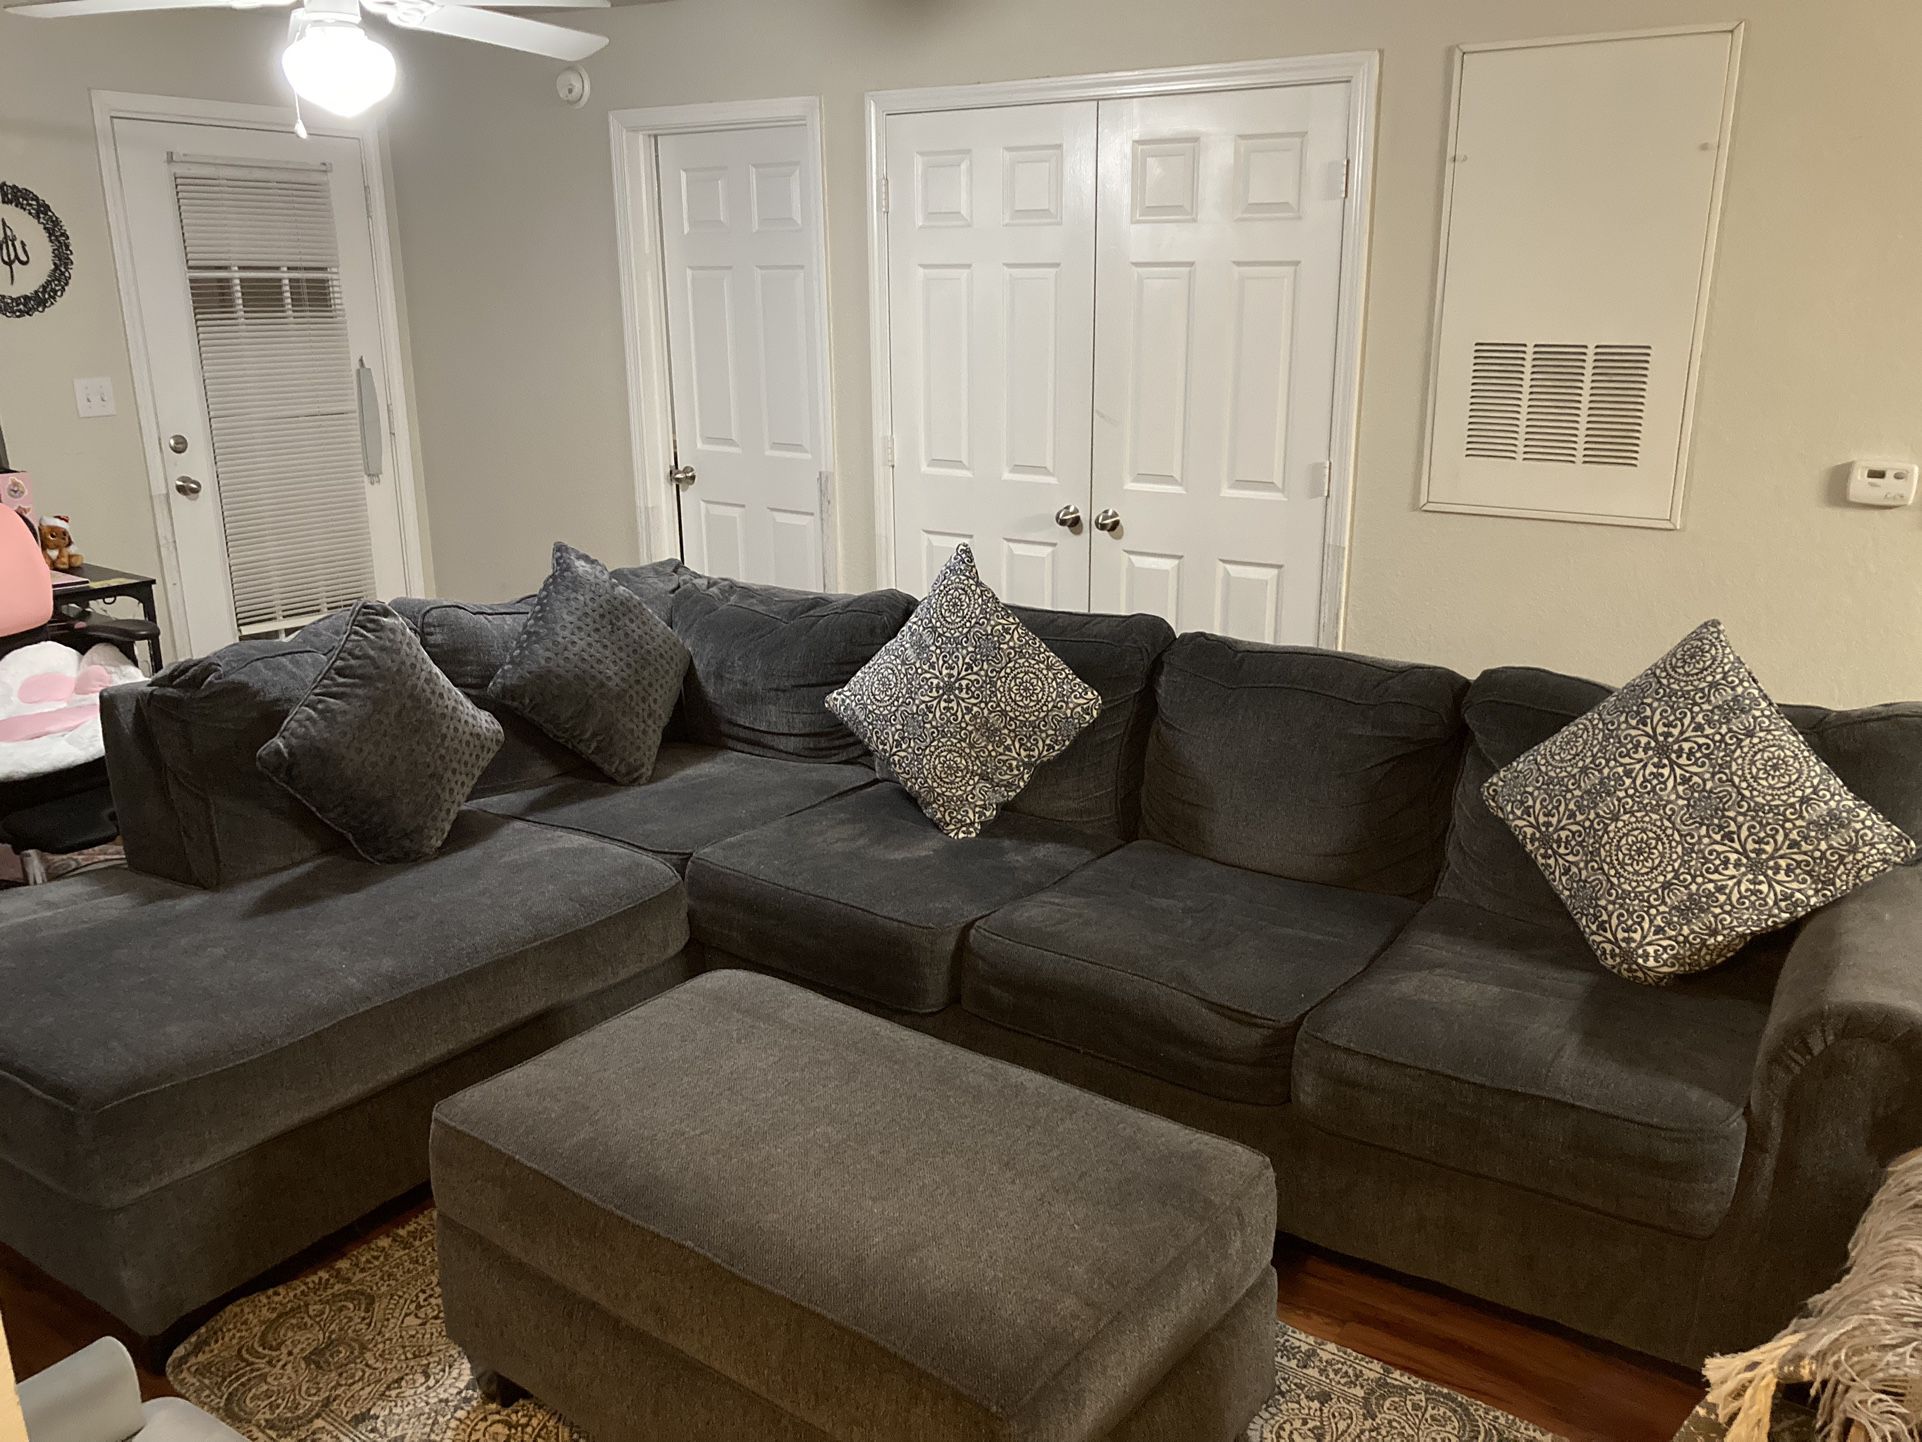 Sectional Couch Gray Fairly New